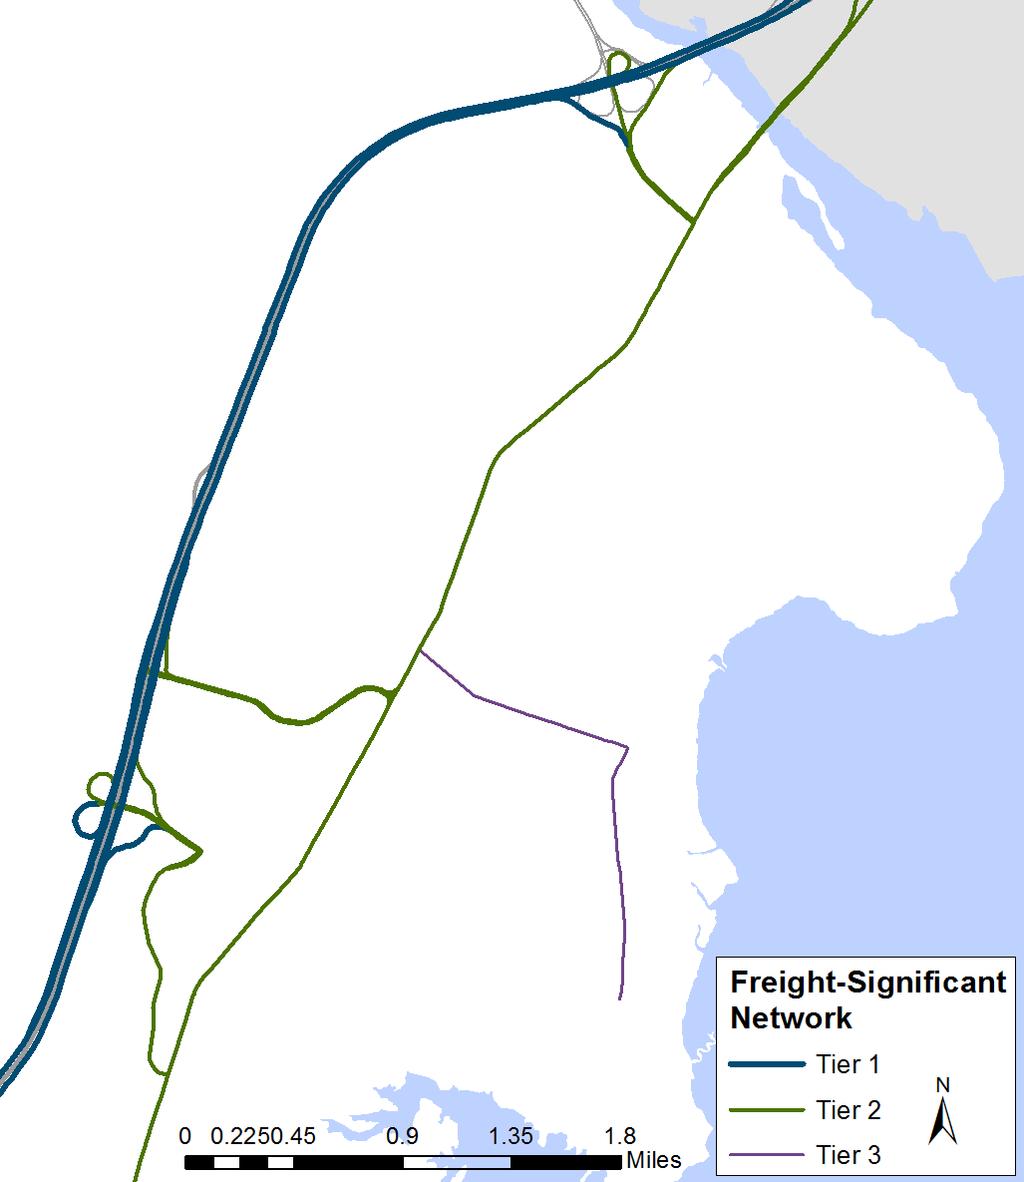 Figure 49: Regional Freight-Significant Network Prince William County Detail B 1 95 123 1 Opitz Blvd.